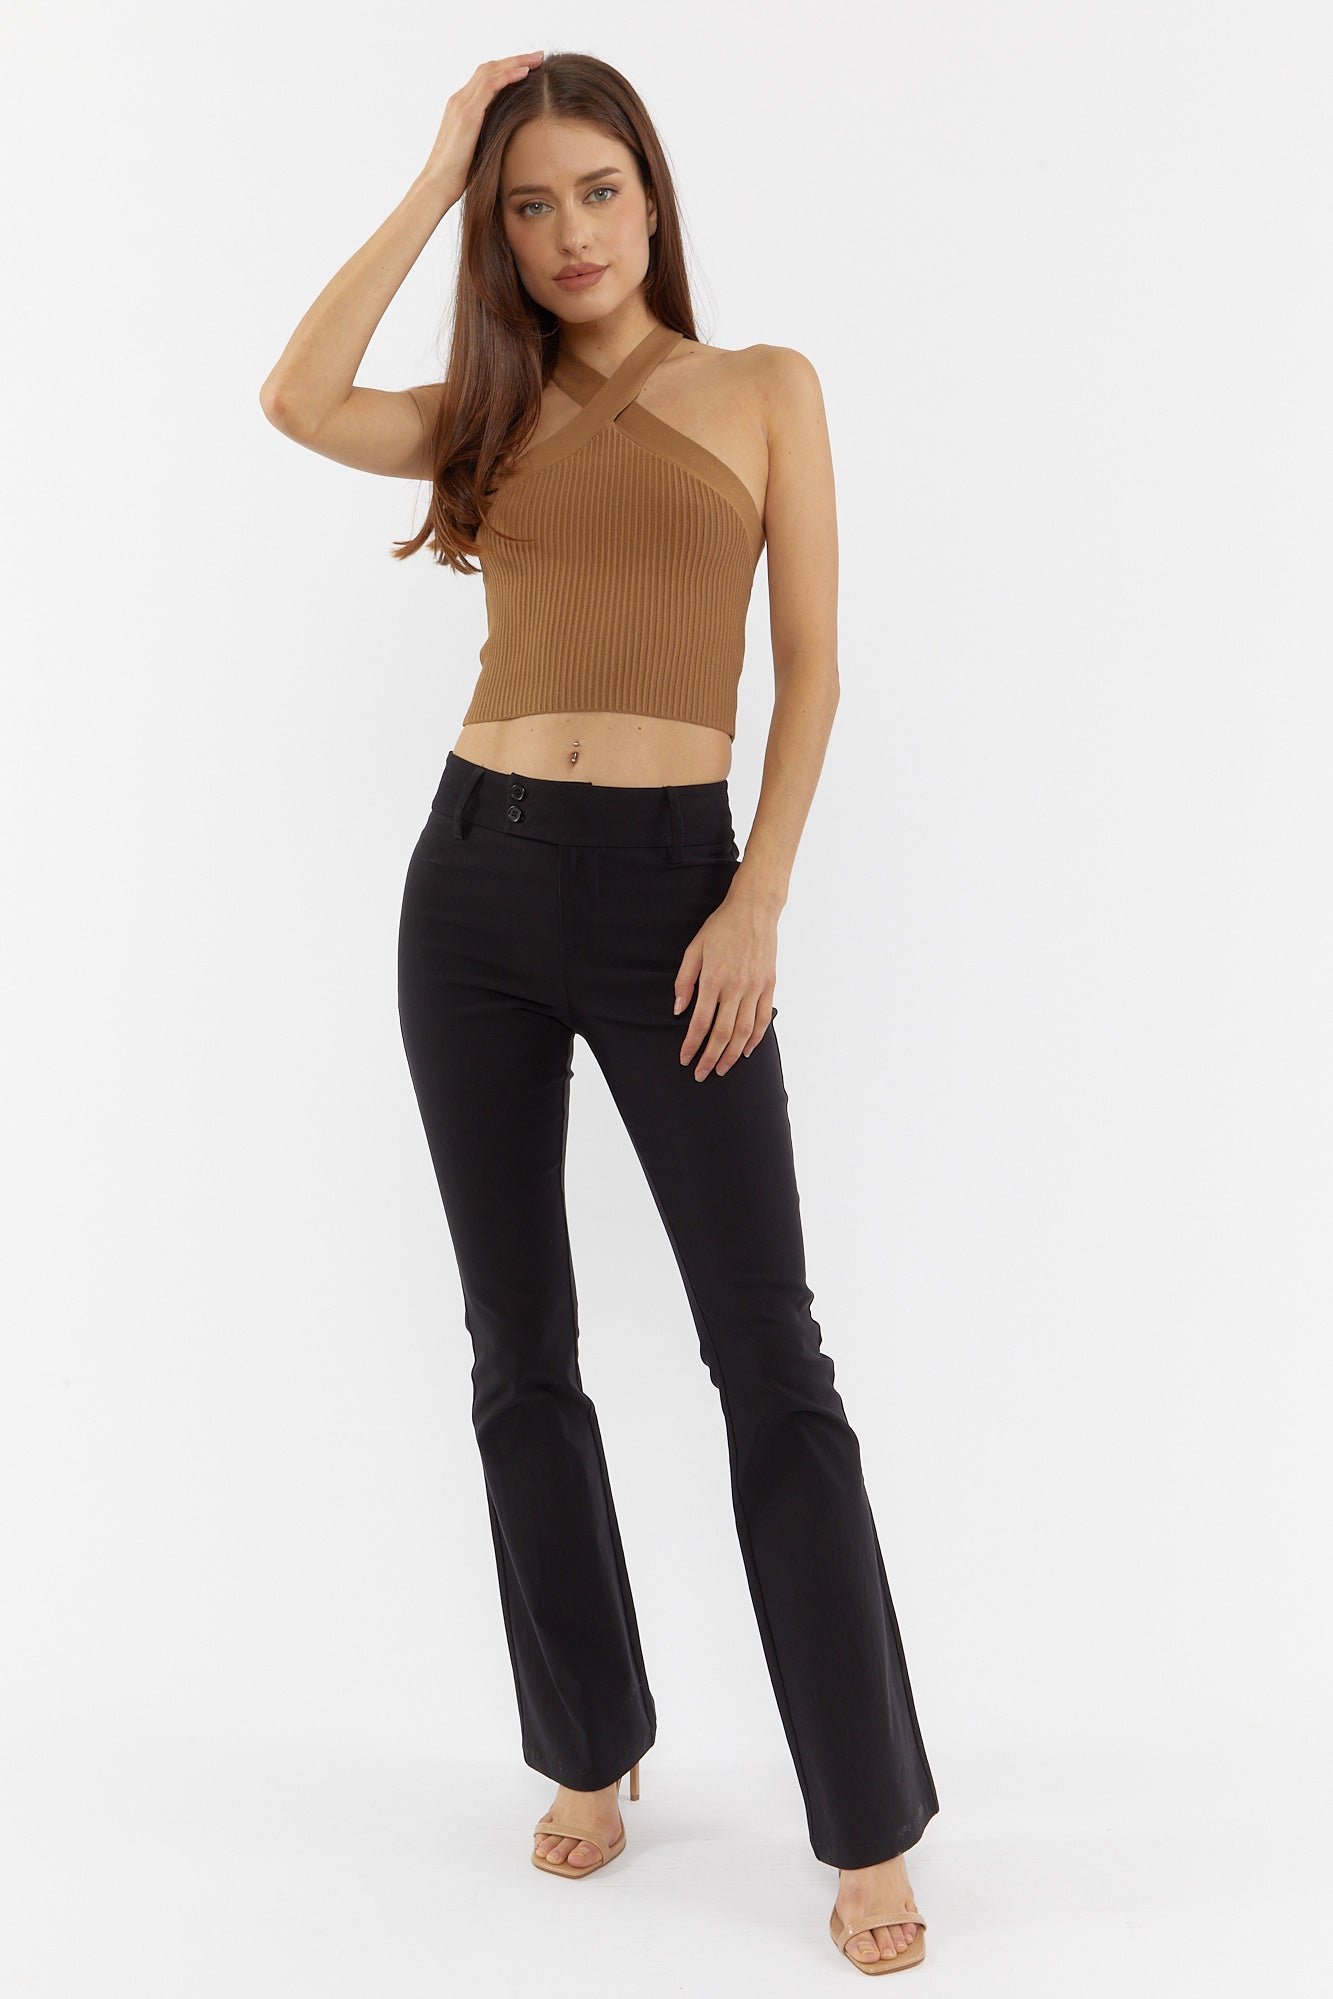 Urban Outfitters Small Flare Pants Mama